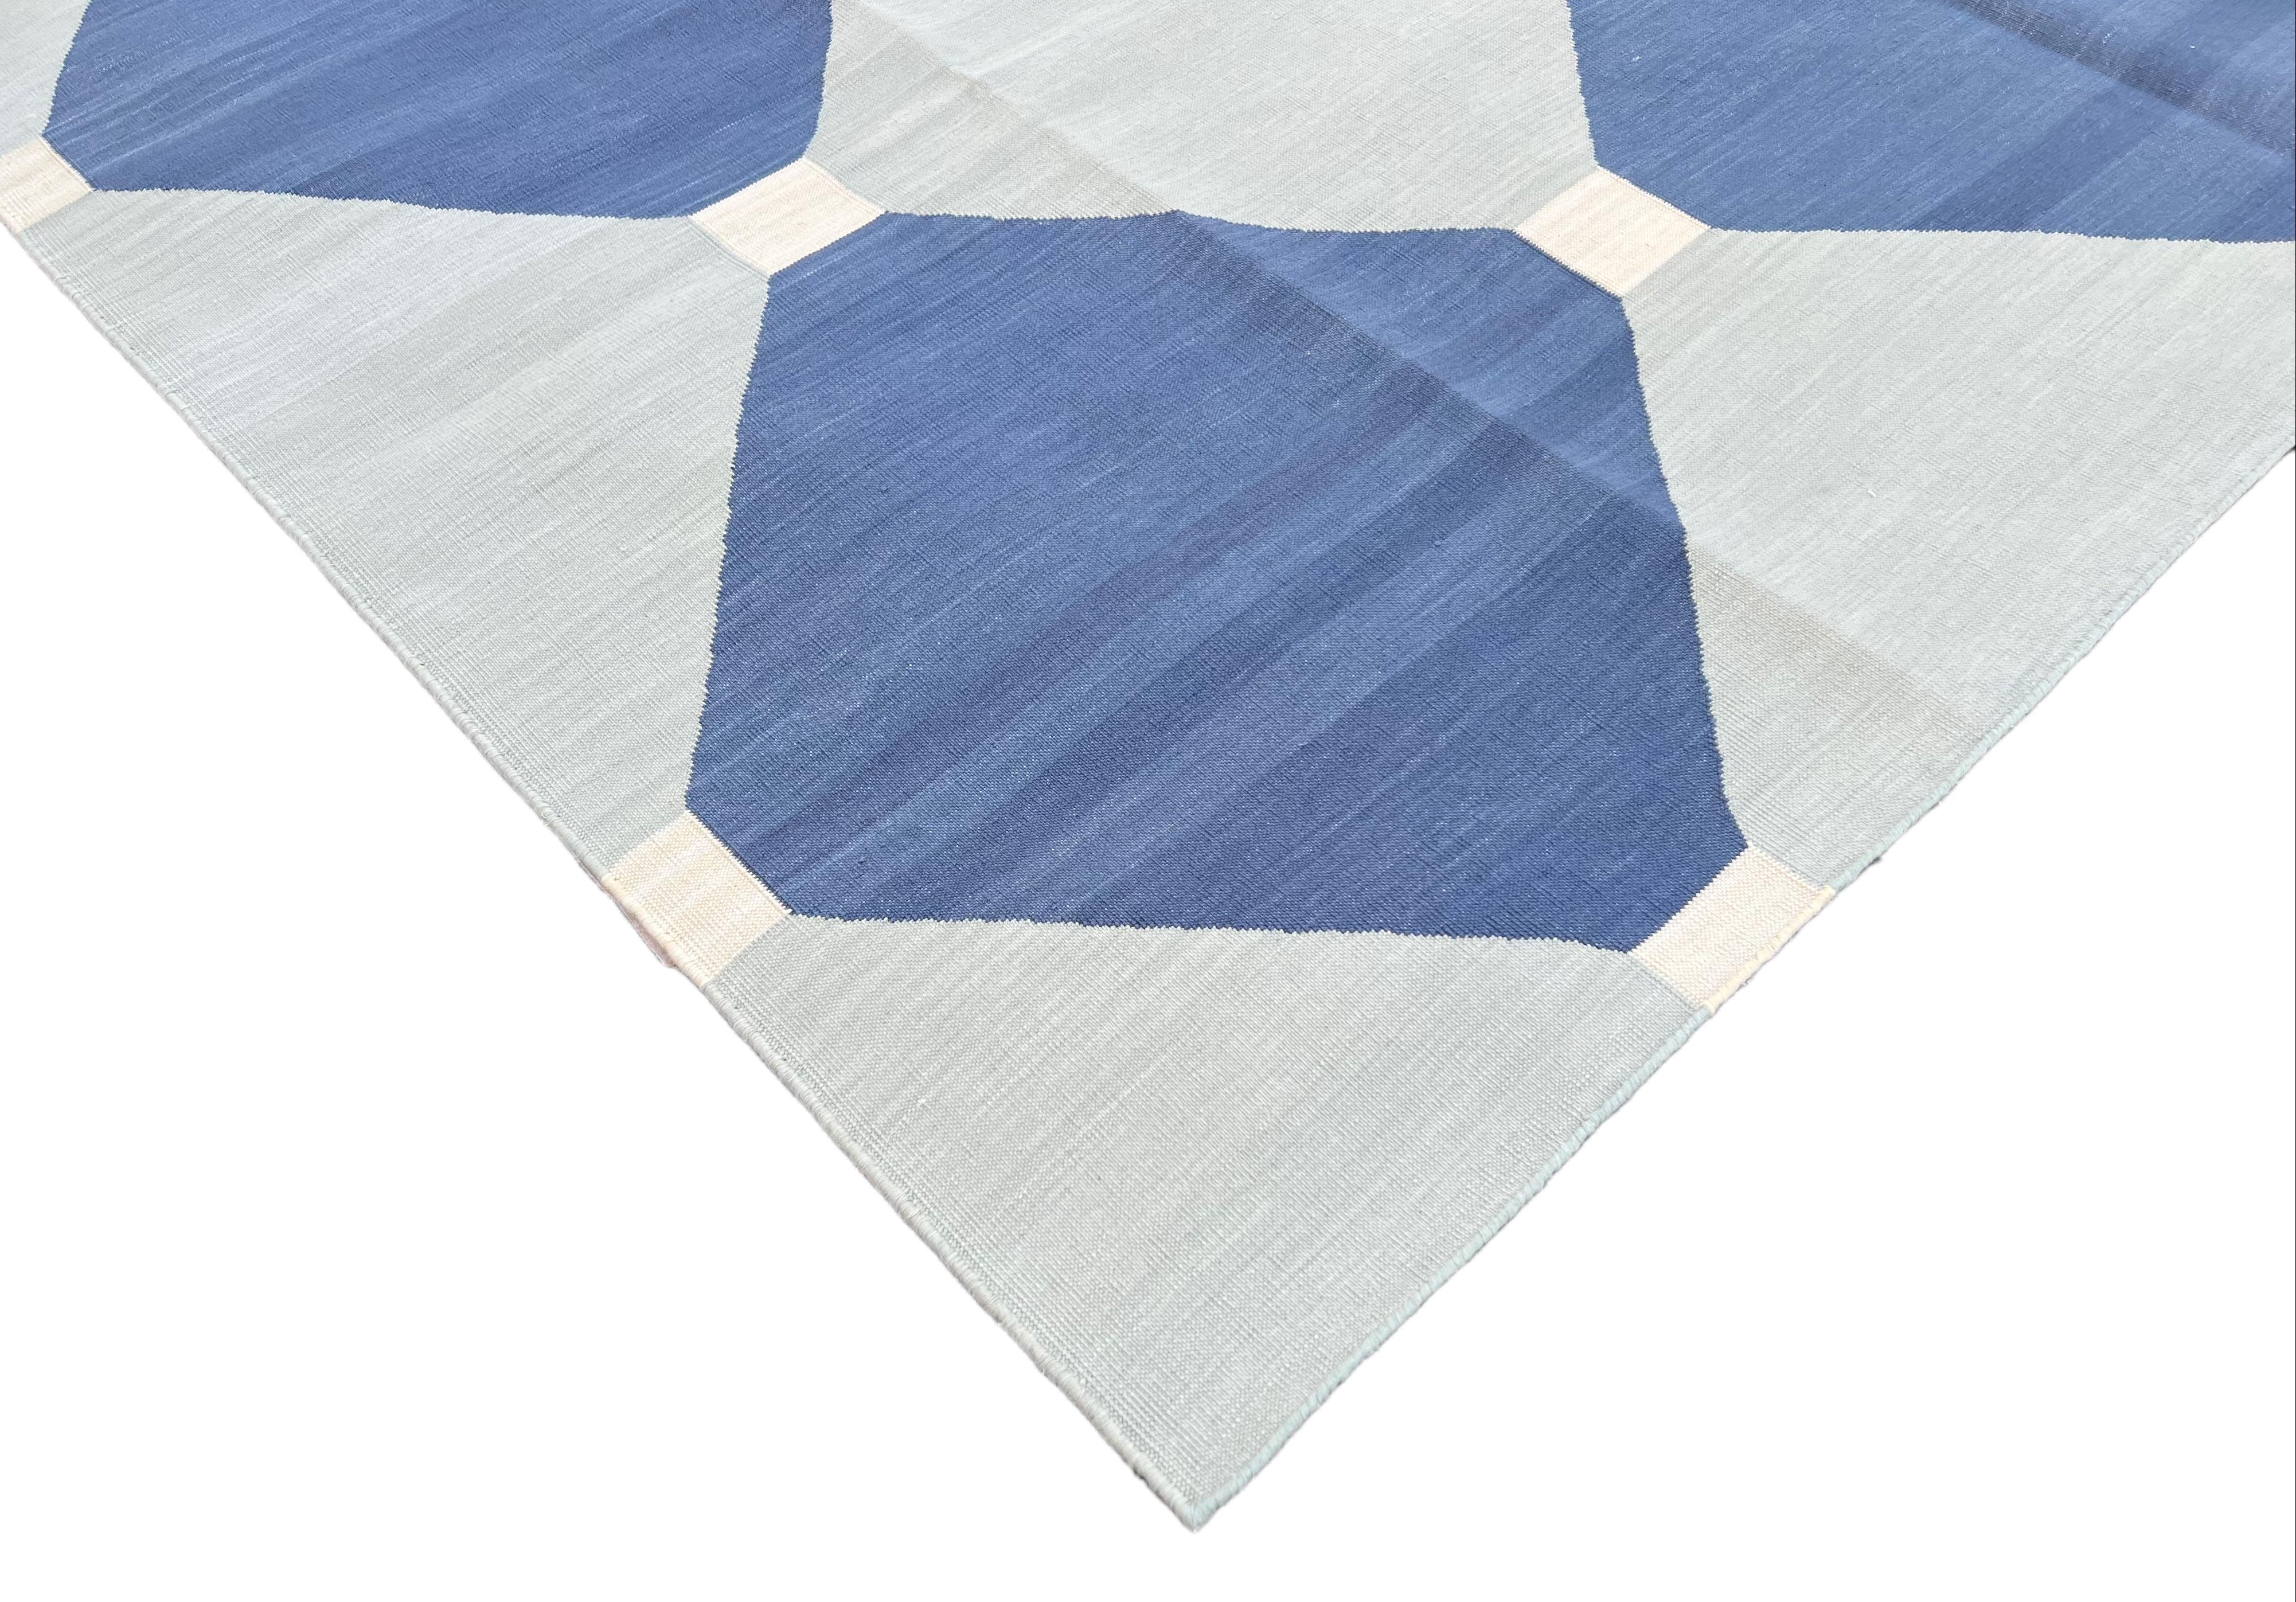 Mid-Century Modern Handmade Cotton Area Flat Weave Rug, 6x9 Grey And Blue Tile Patterned Dhurrie For Sale